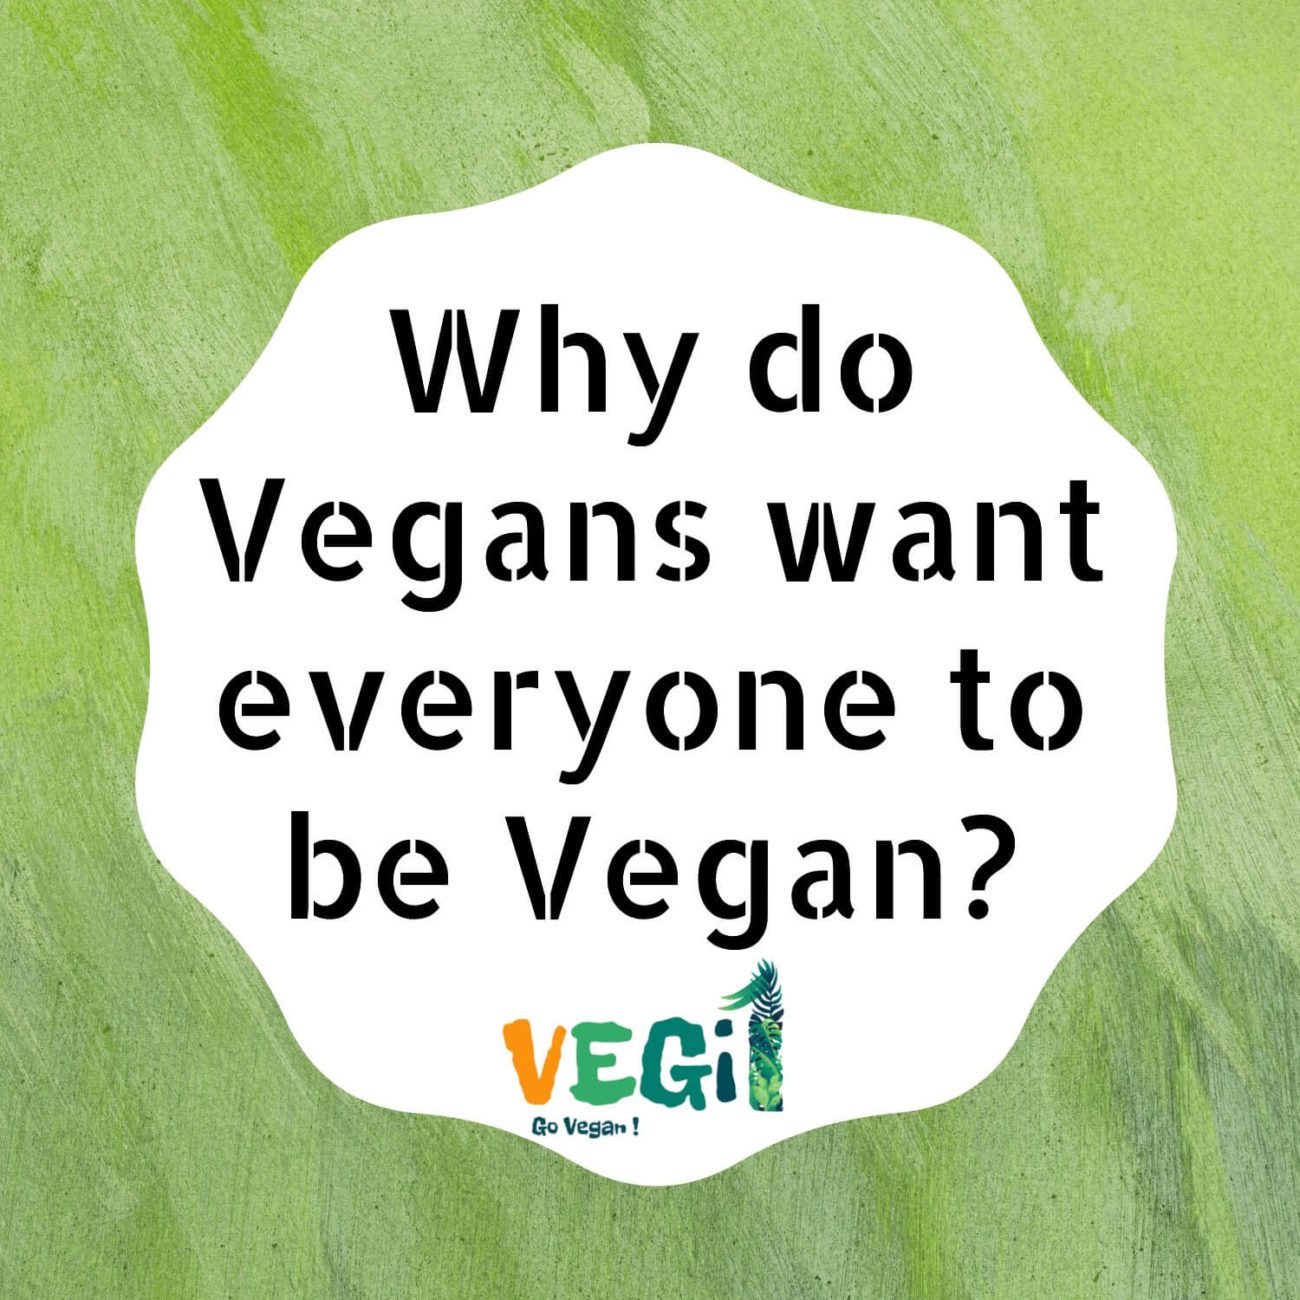 Why do vegans want everyone to be vegan?